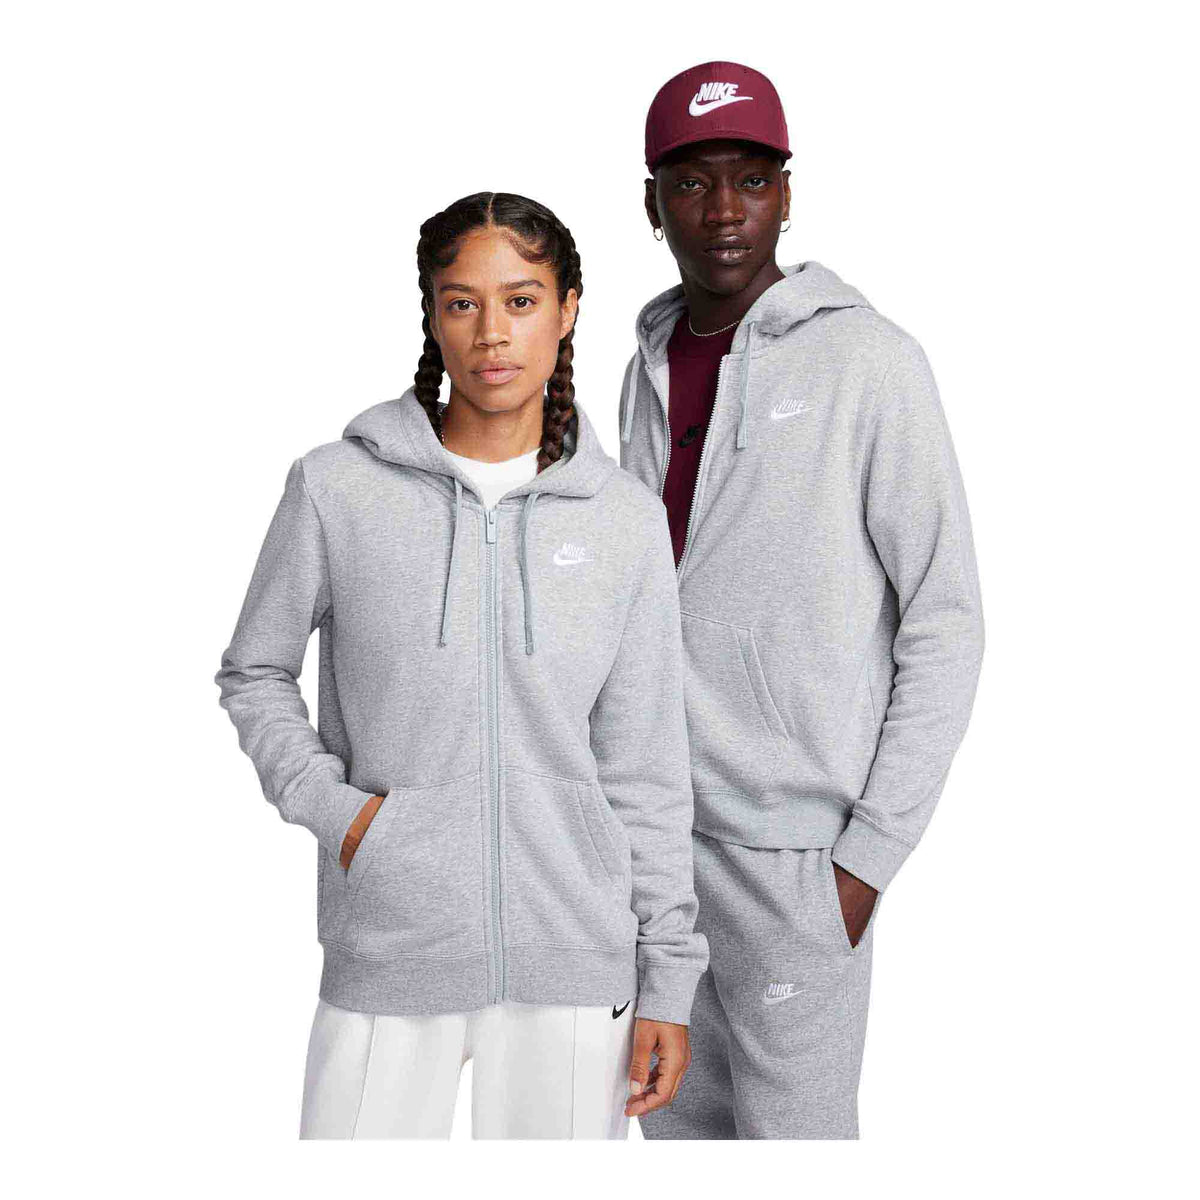 Nike SB will celebrate iconic skater Paul Rodriguez with his own Dunk High Women's Full-Zip Hoodie